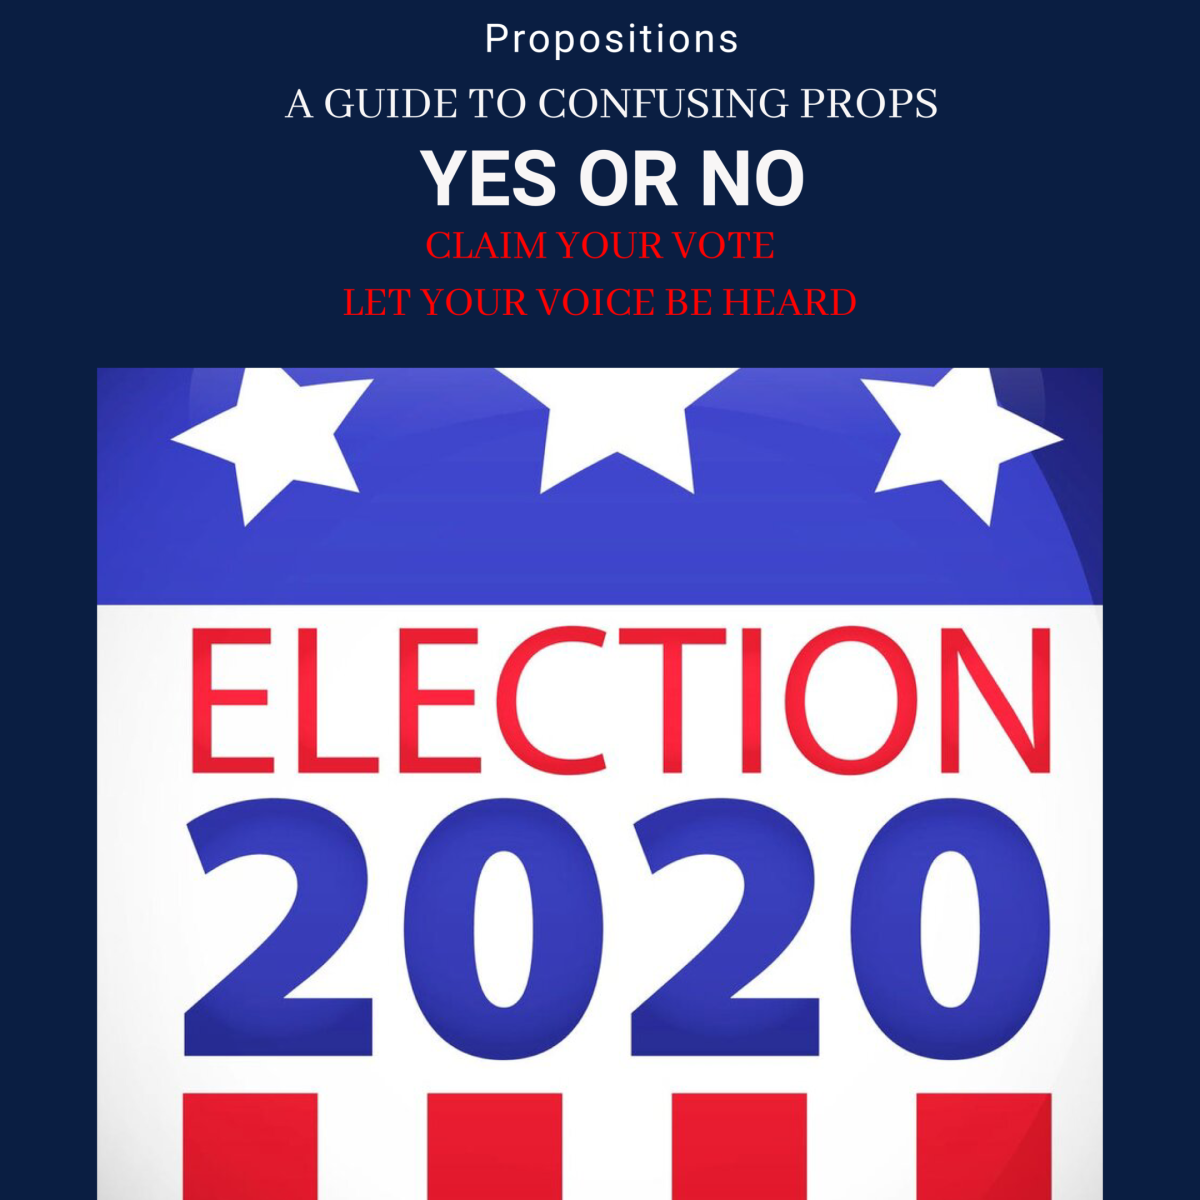 A Guide to the 2020 Propositions